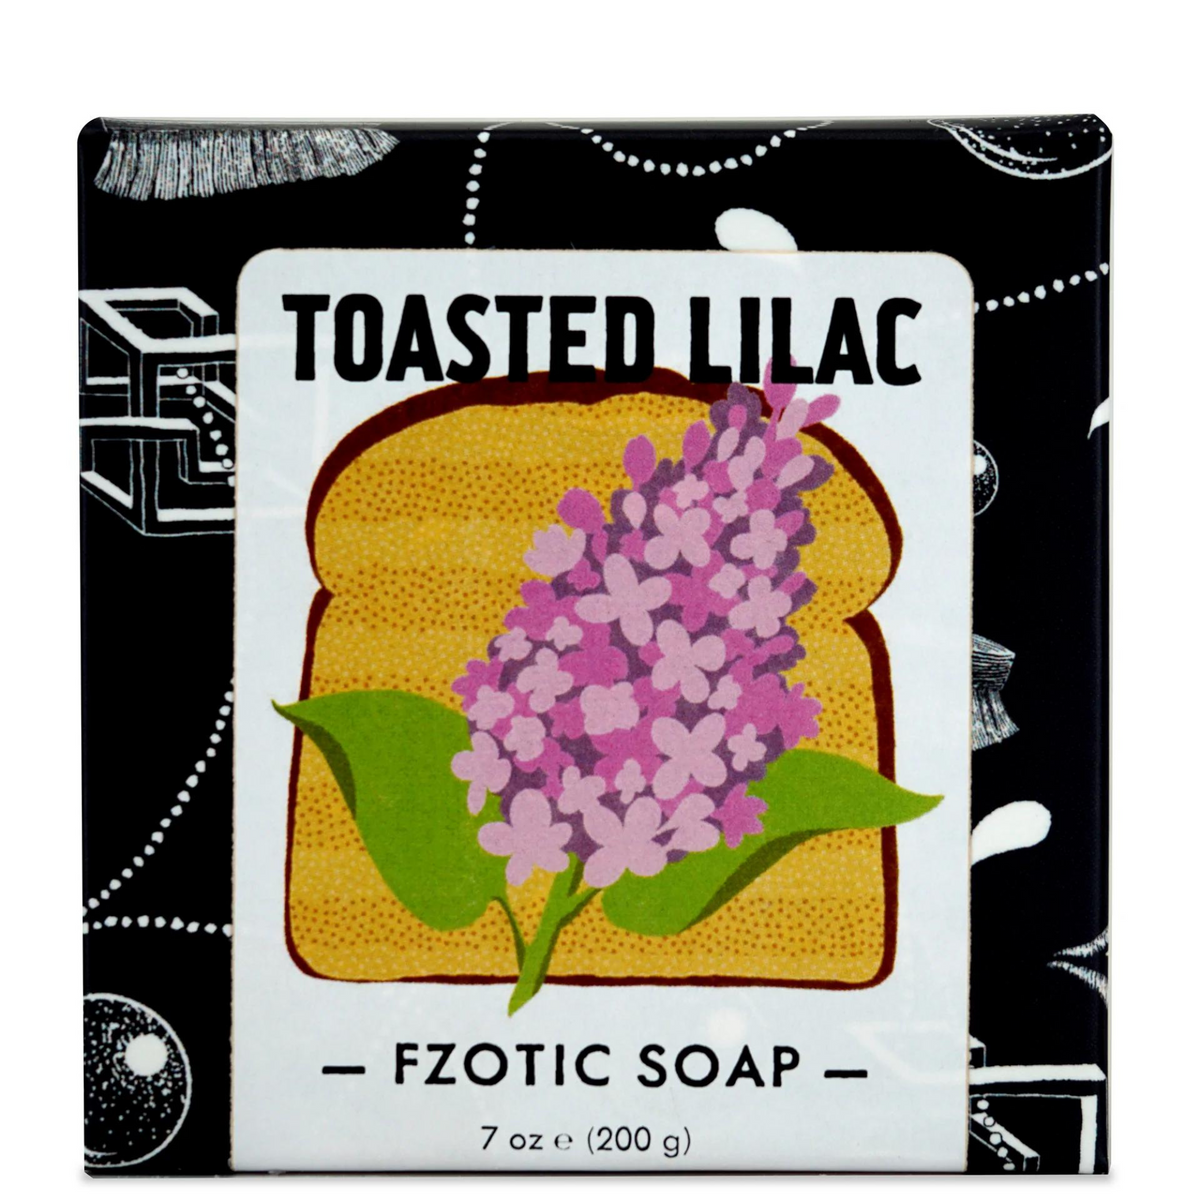 Primary Image of Toasted Lilac Soap